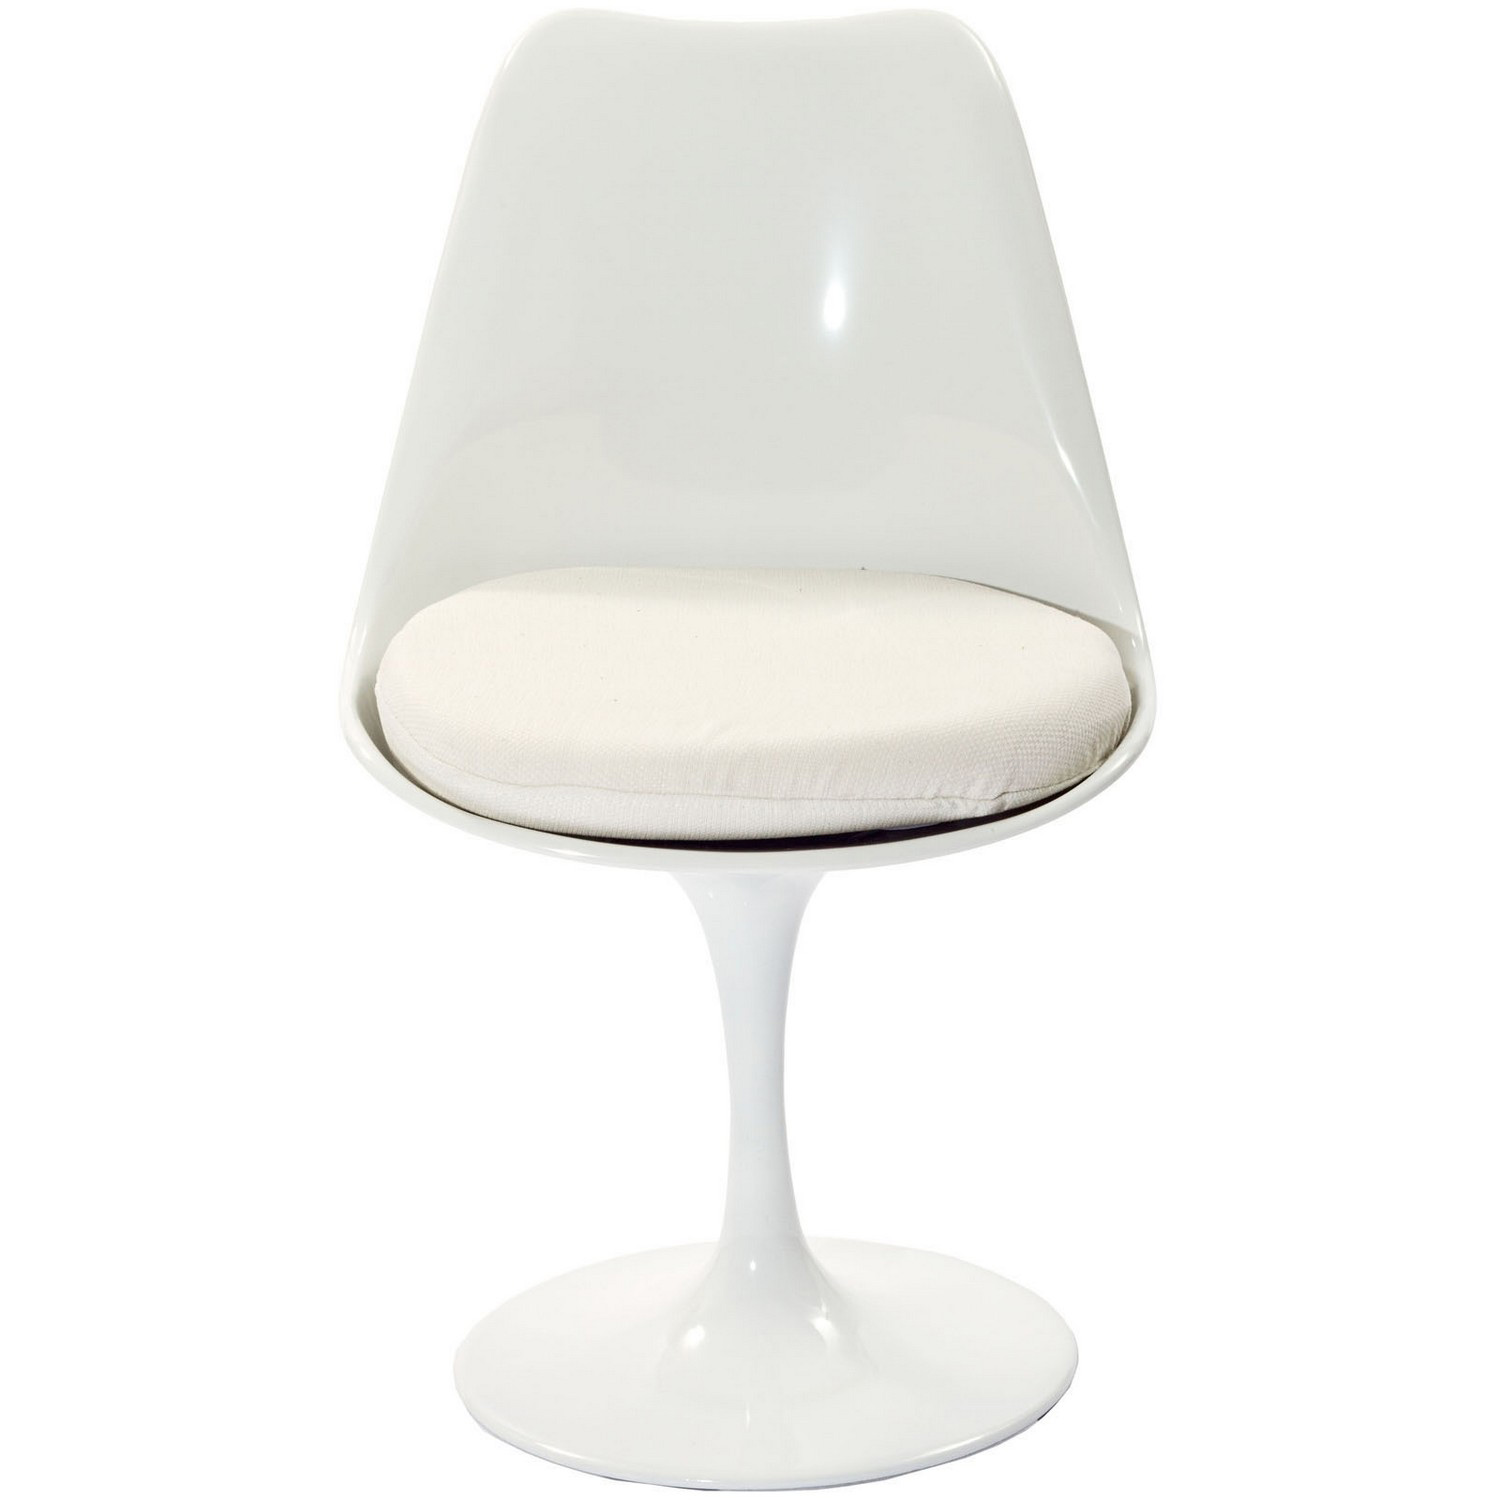 Modway Lippa Dining Side Chair Fabric Set of 4 - White